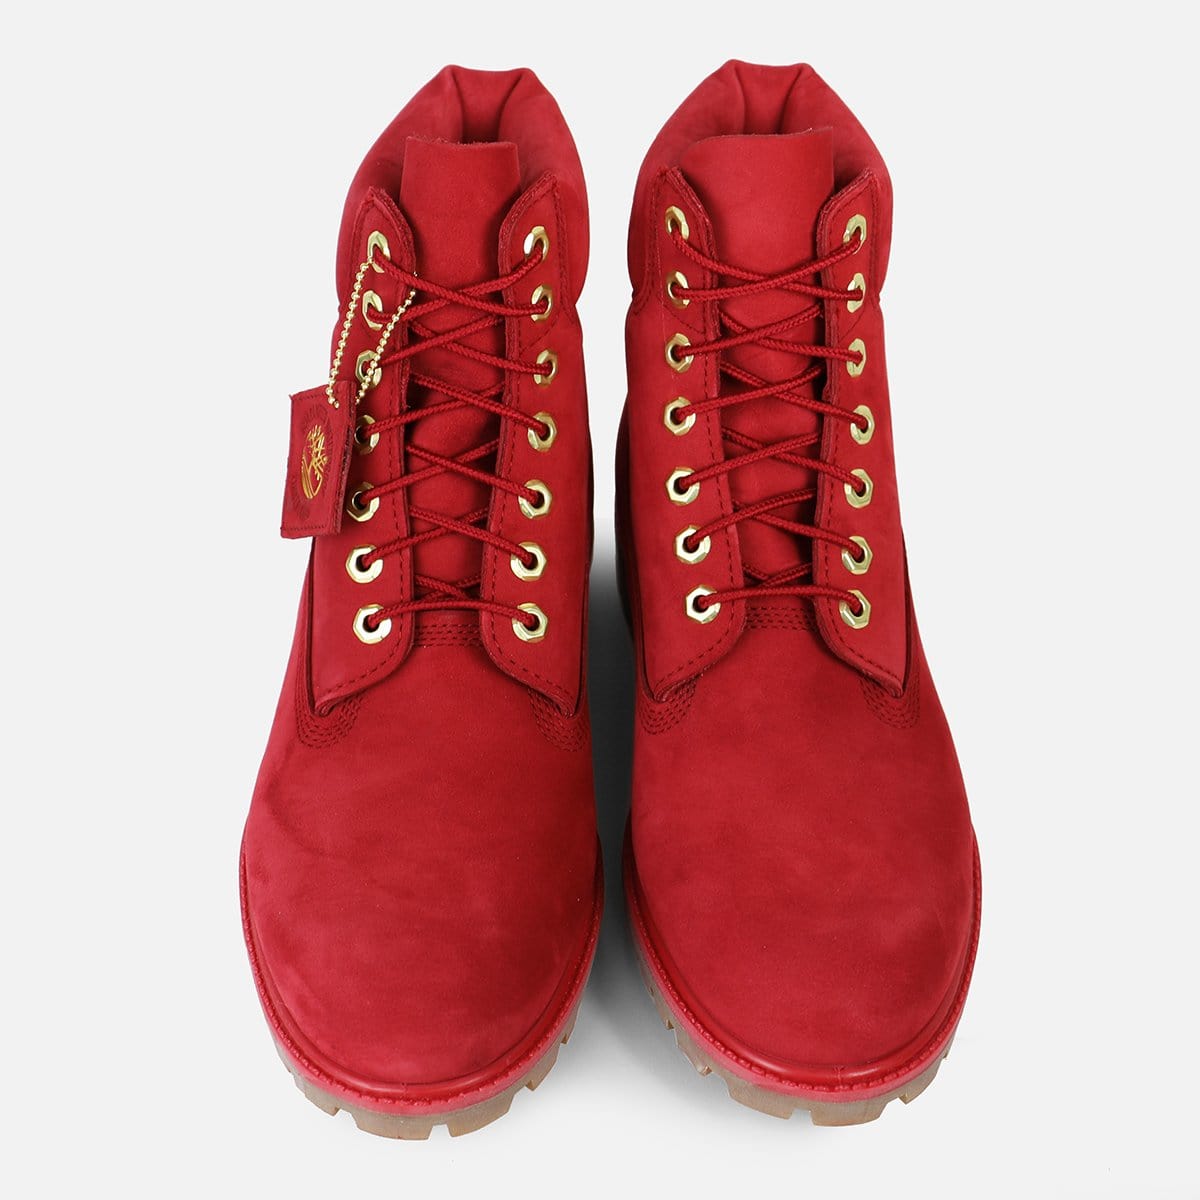 RUVilla.com is where to buy the Timberland 6" Premium Boot 'Fire' (Red/Red)!